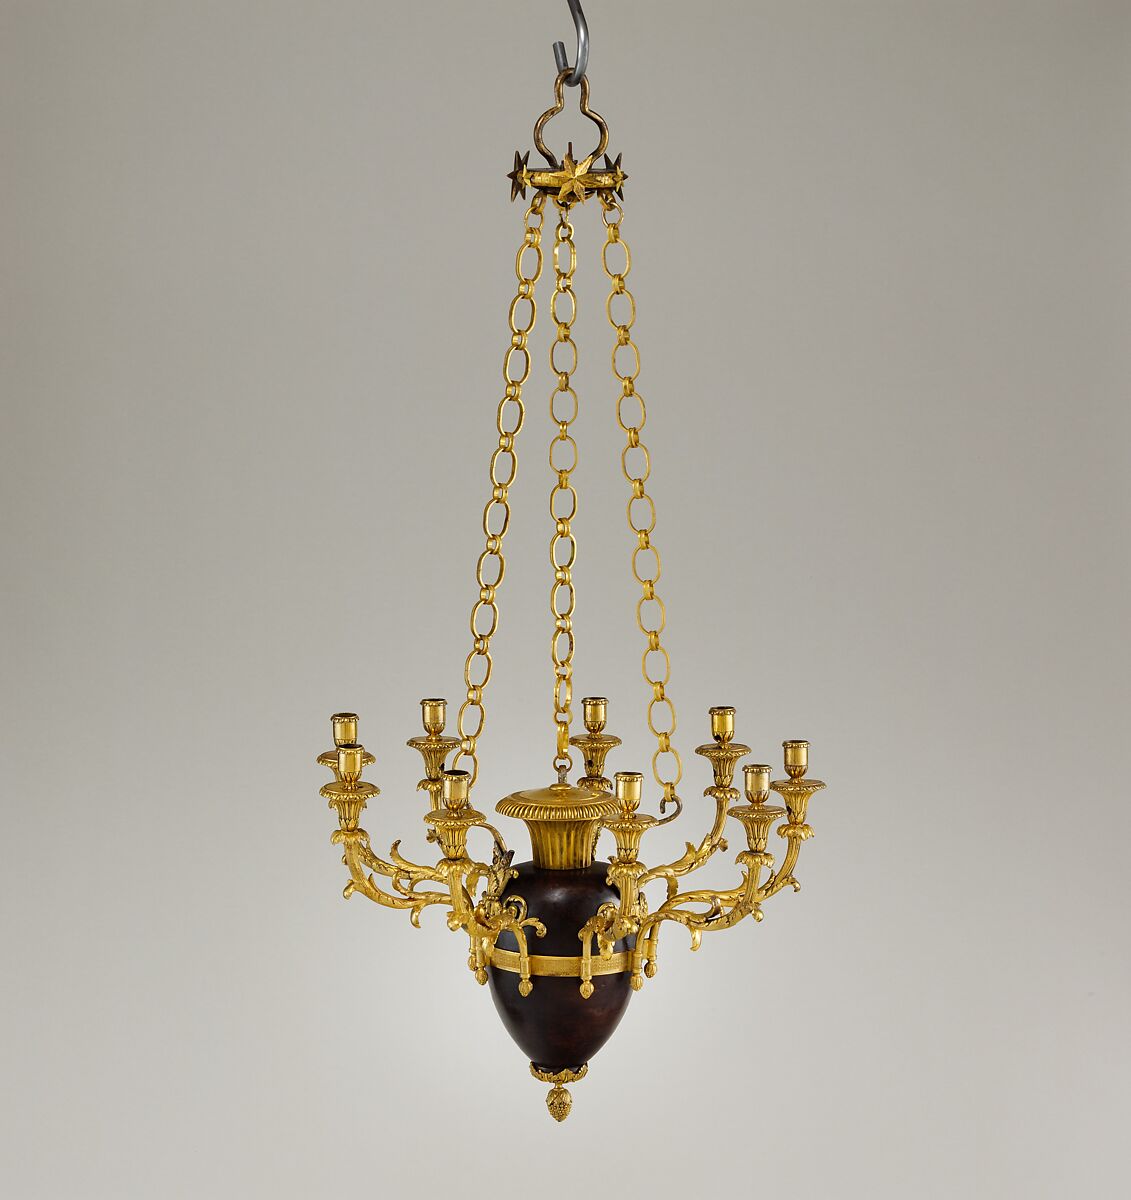 Nine-light chandelier, Gilt and patinated bronze, French 